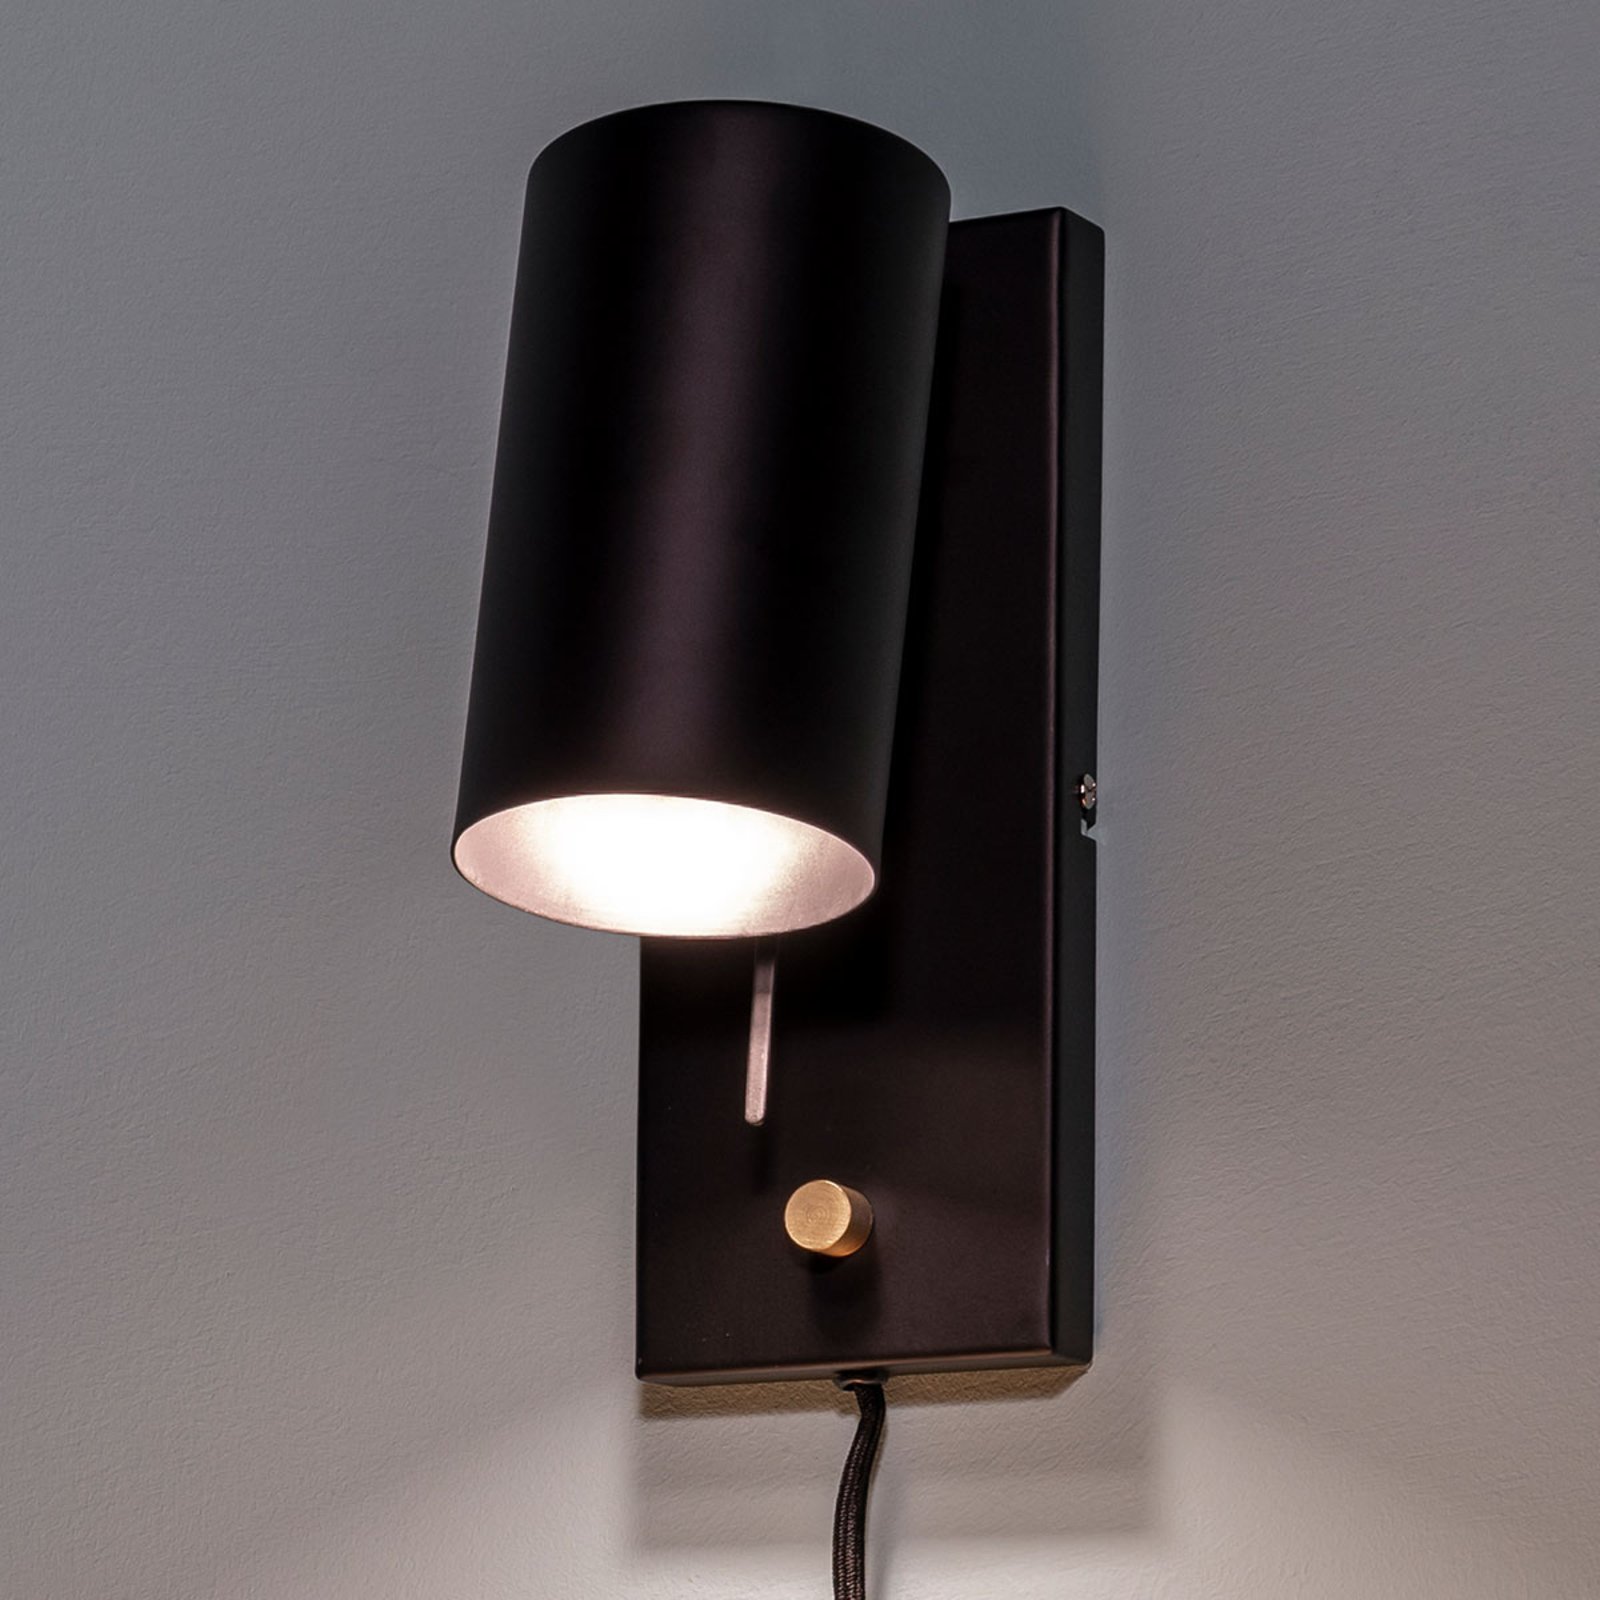 Dimmable wall light Carrie with cable and plug